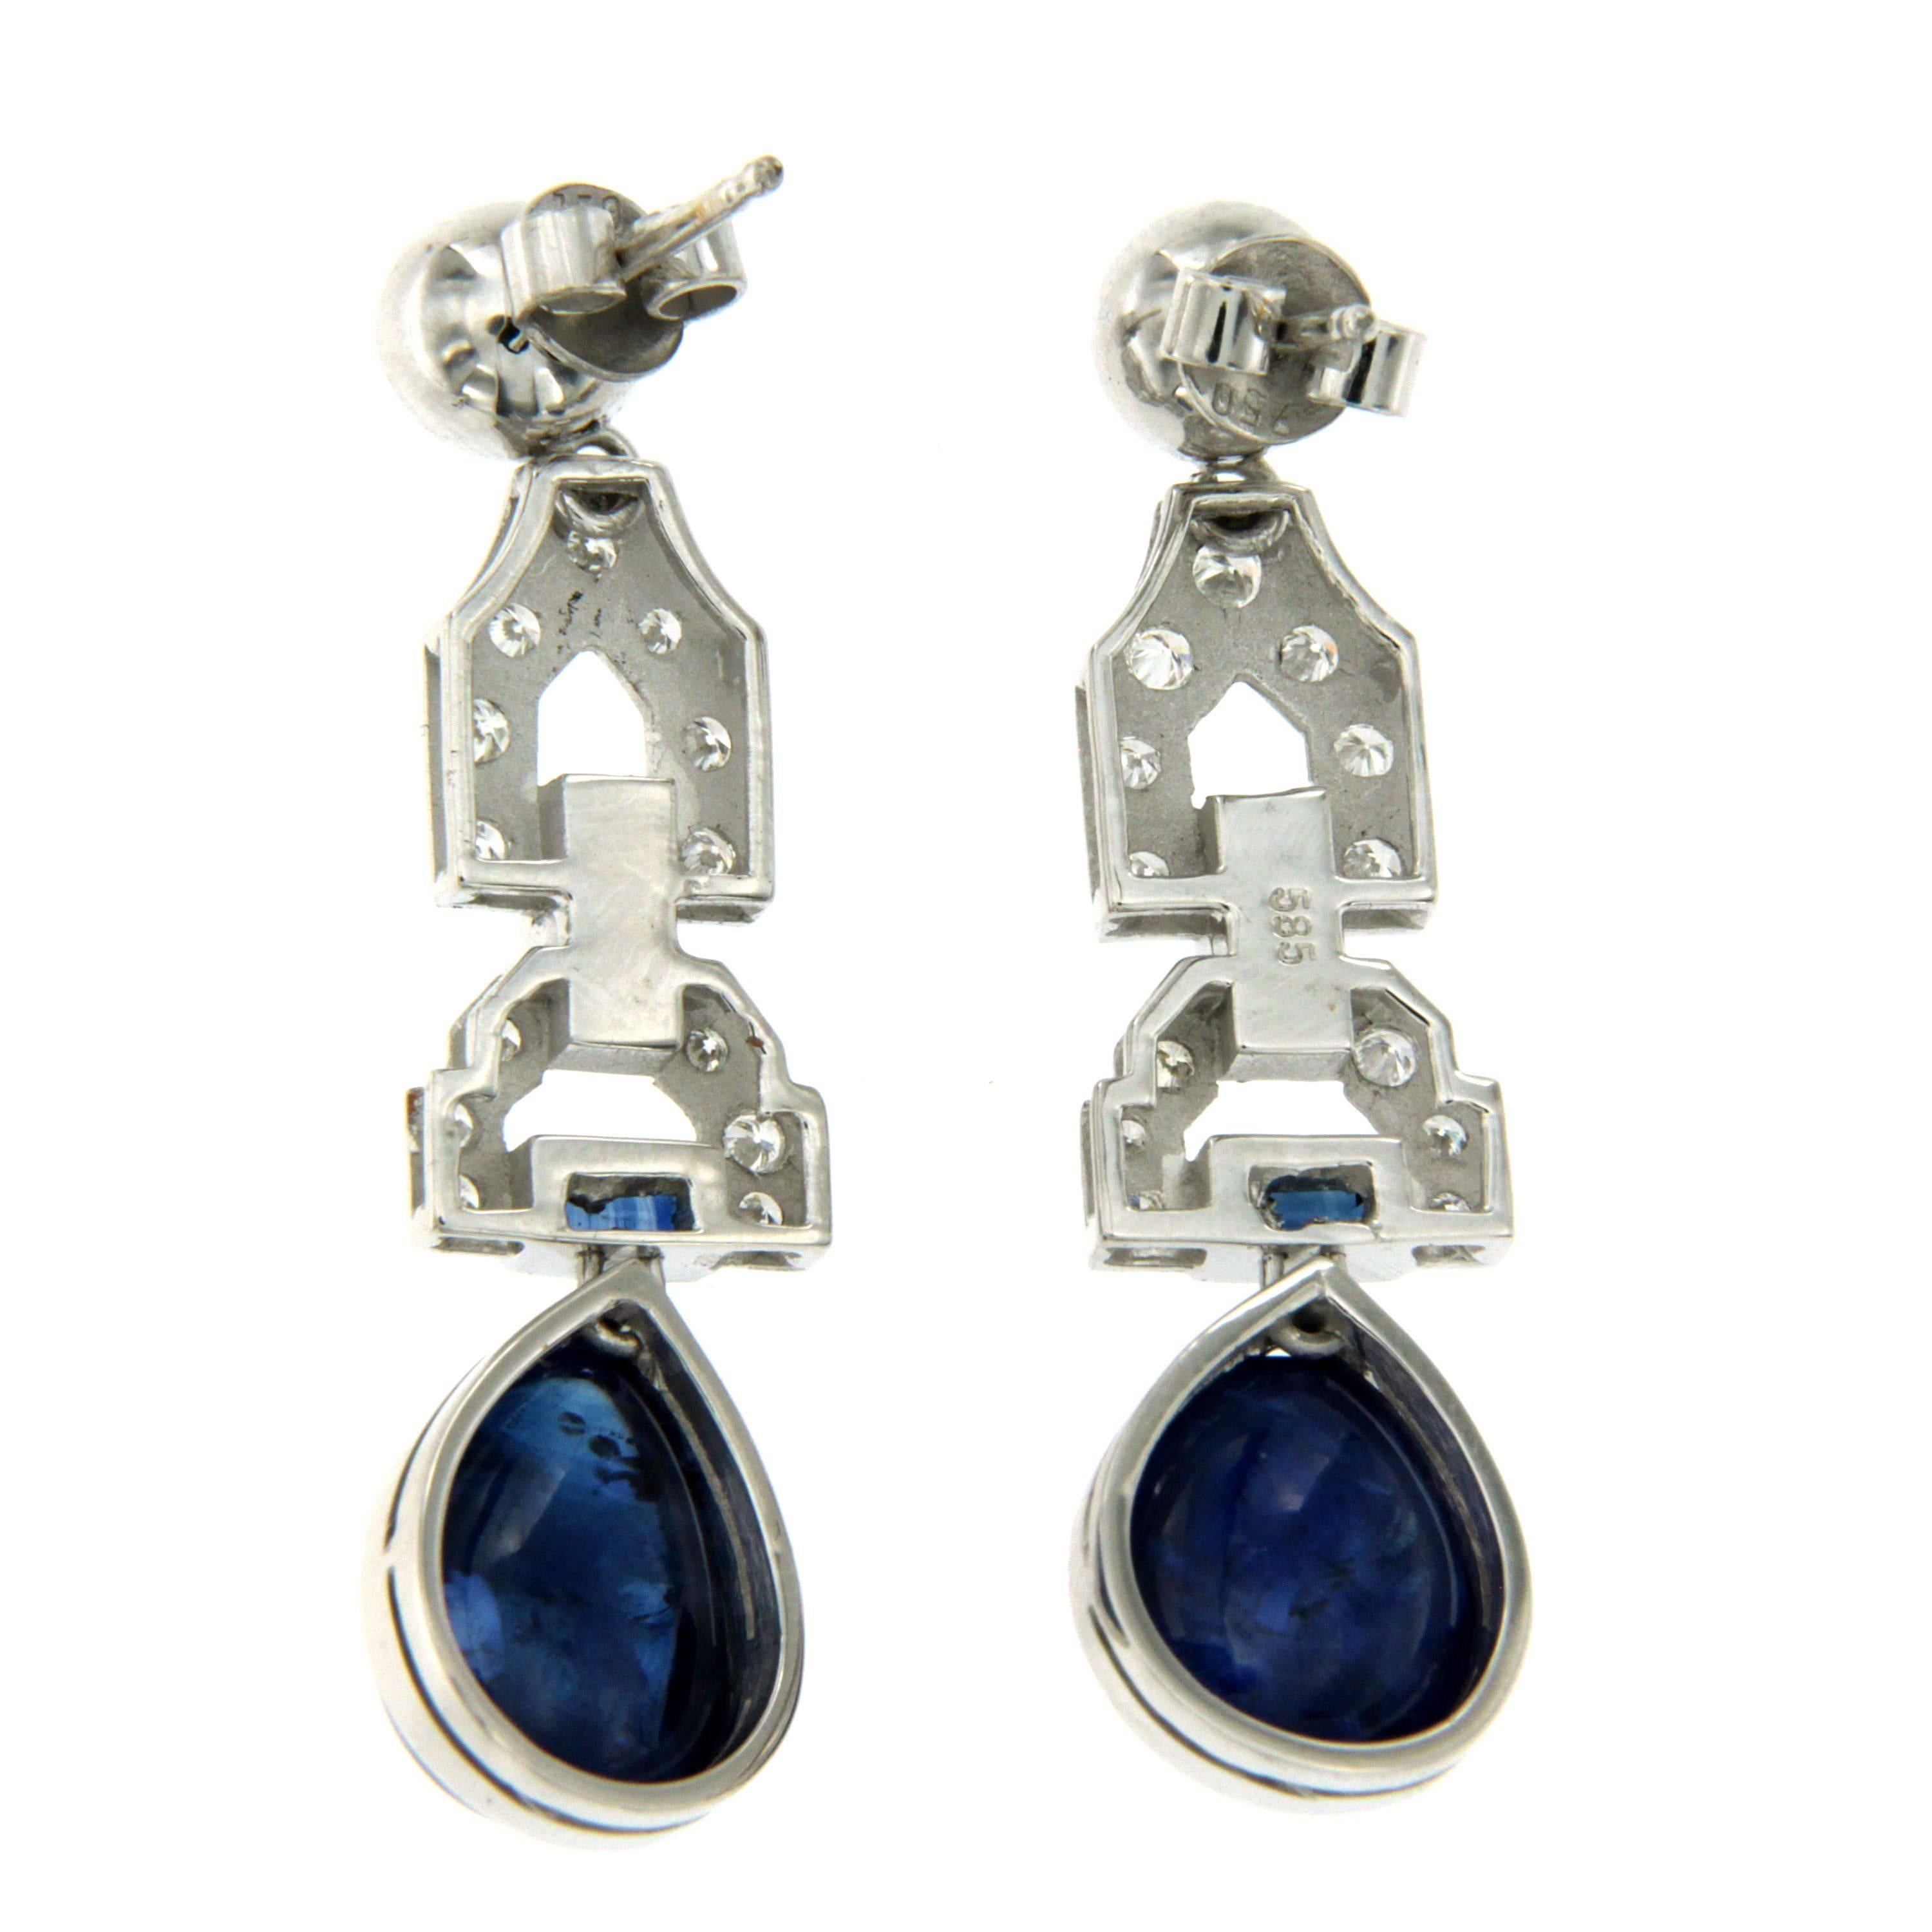 These Beautiful Art Deco 14k white gold earrings feature at the bottom 2 large teardrop cabochon natural deep blue Sapphire weighing approx. 14 carats, connected by open links set with 2 custom cut Sapphire and colorless round Diamonds weighing